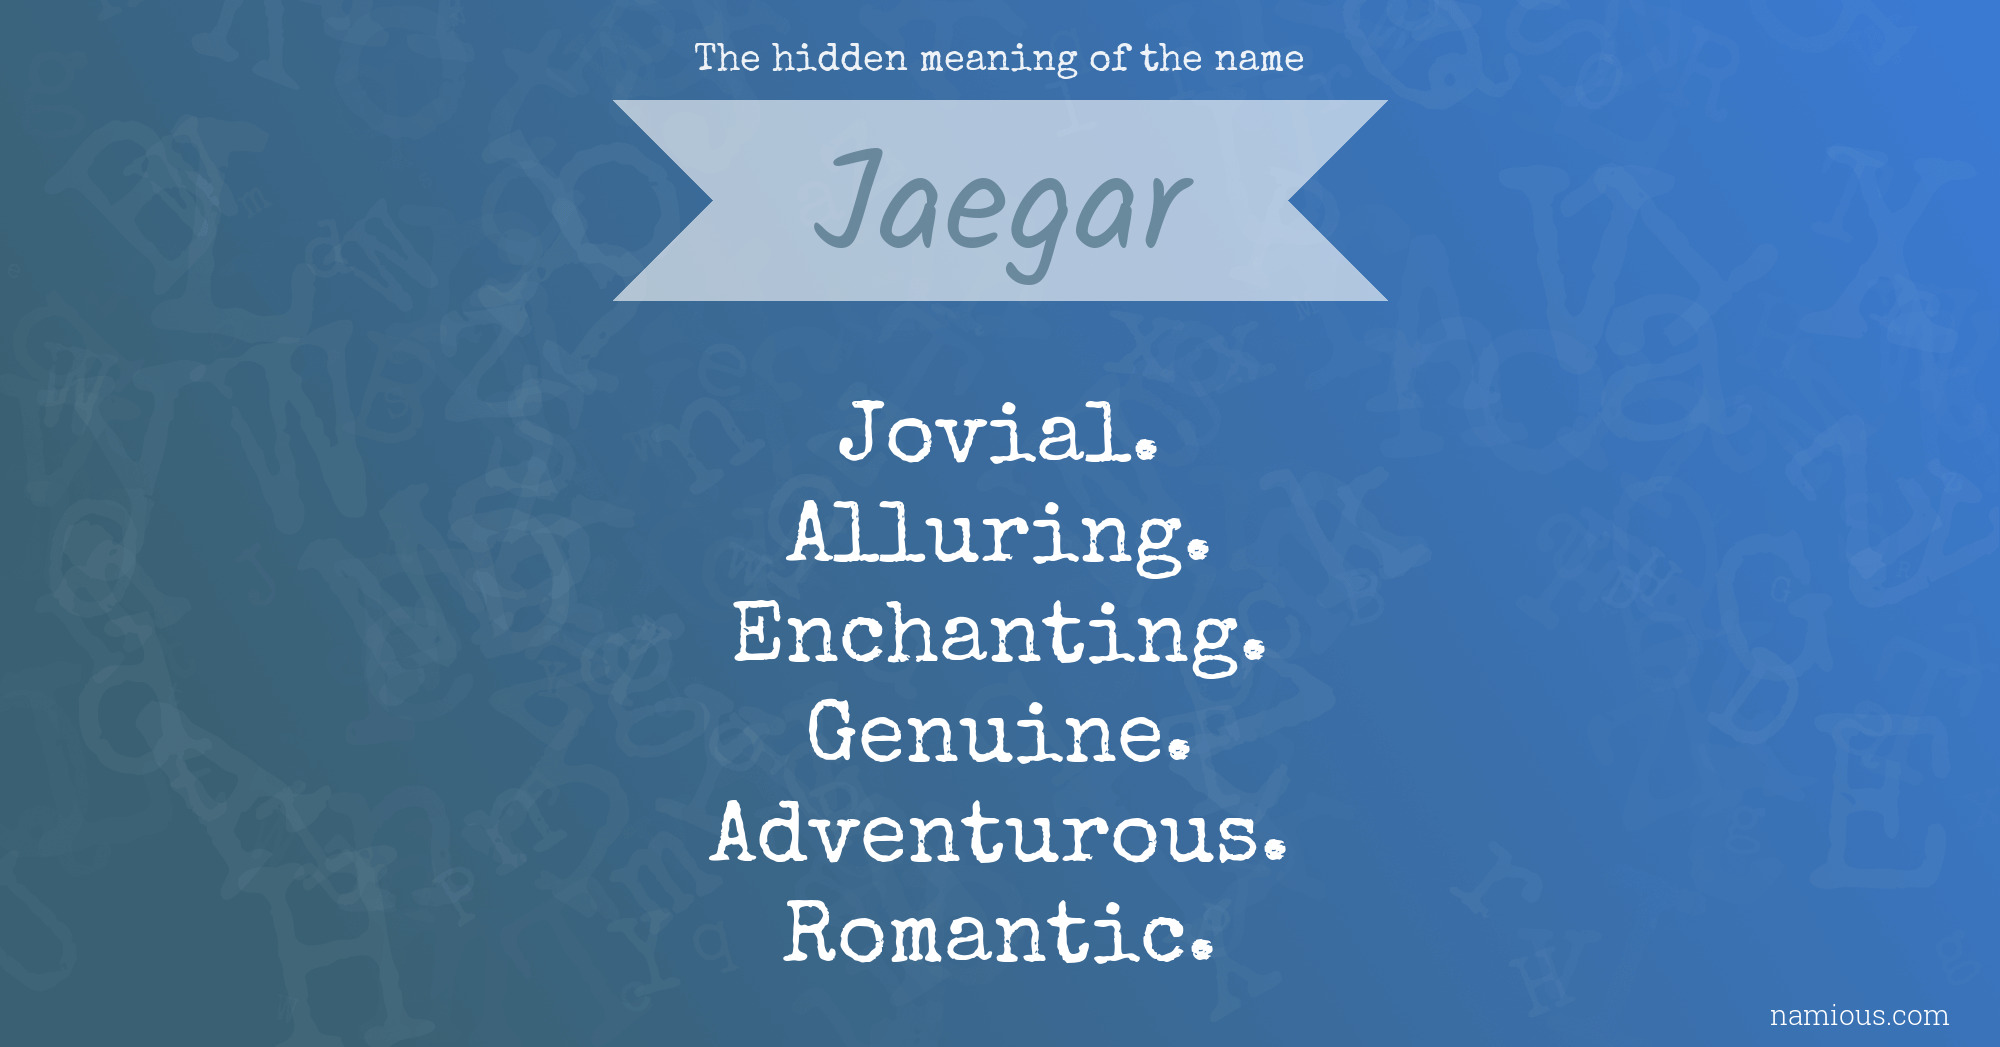 The hidden meaning of the name Jaegar